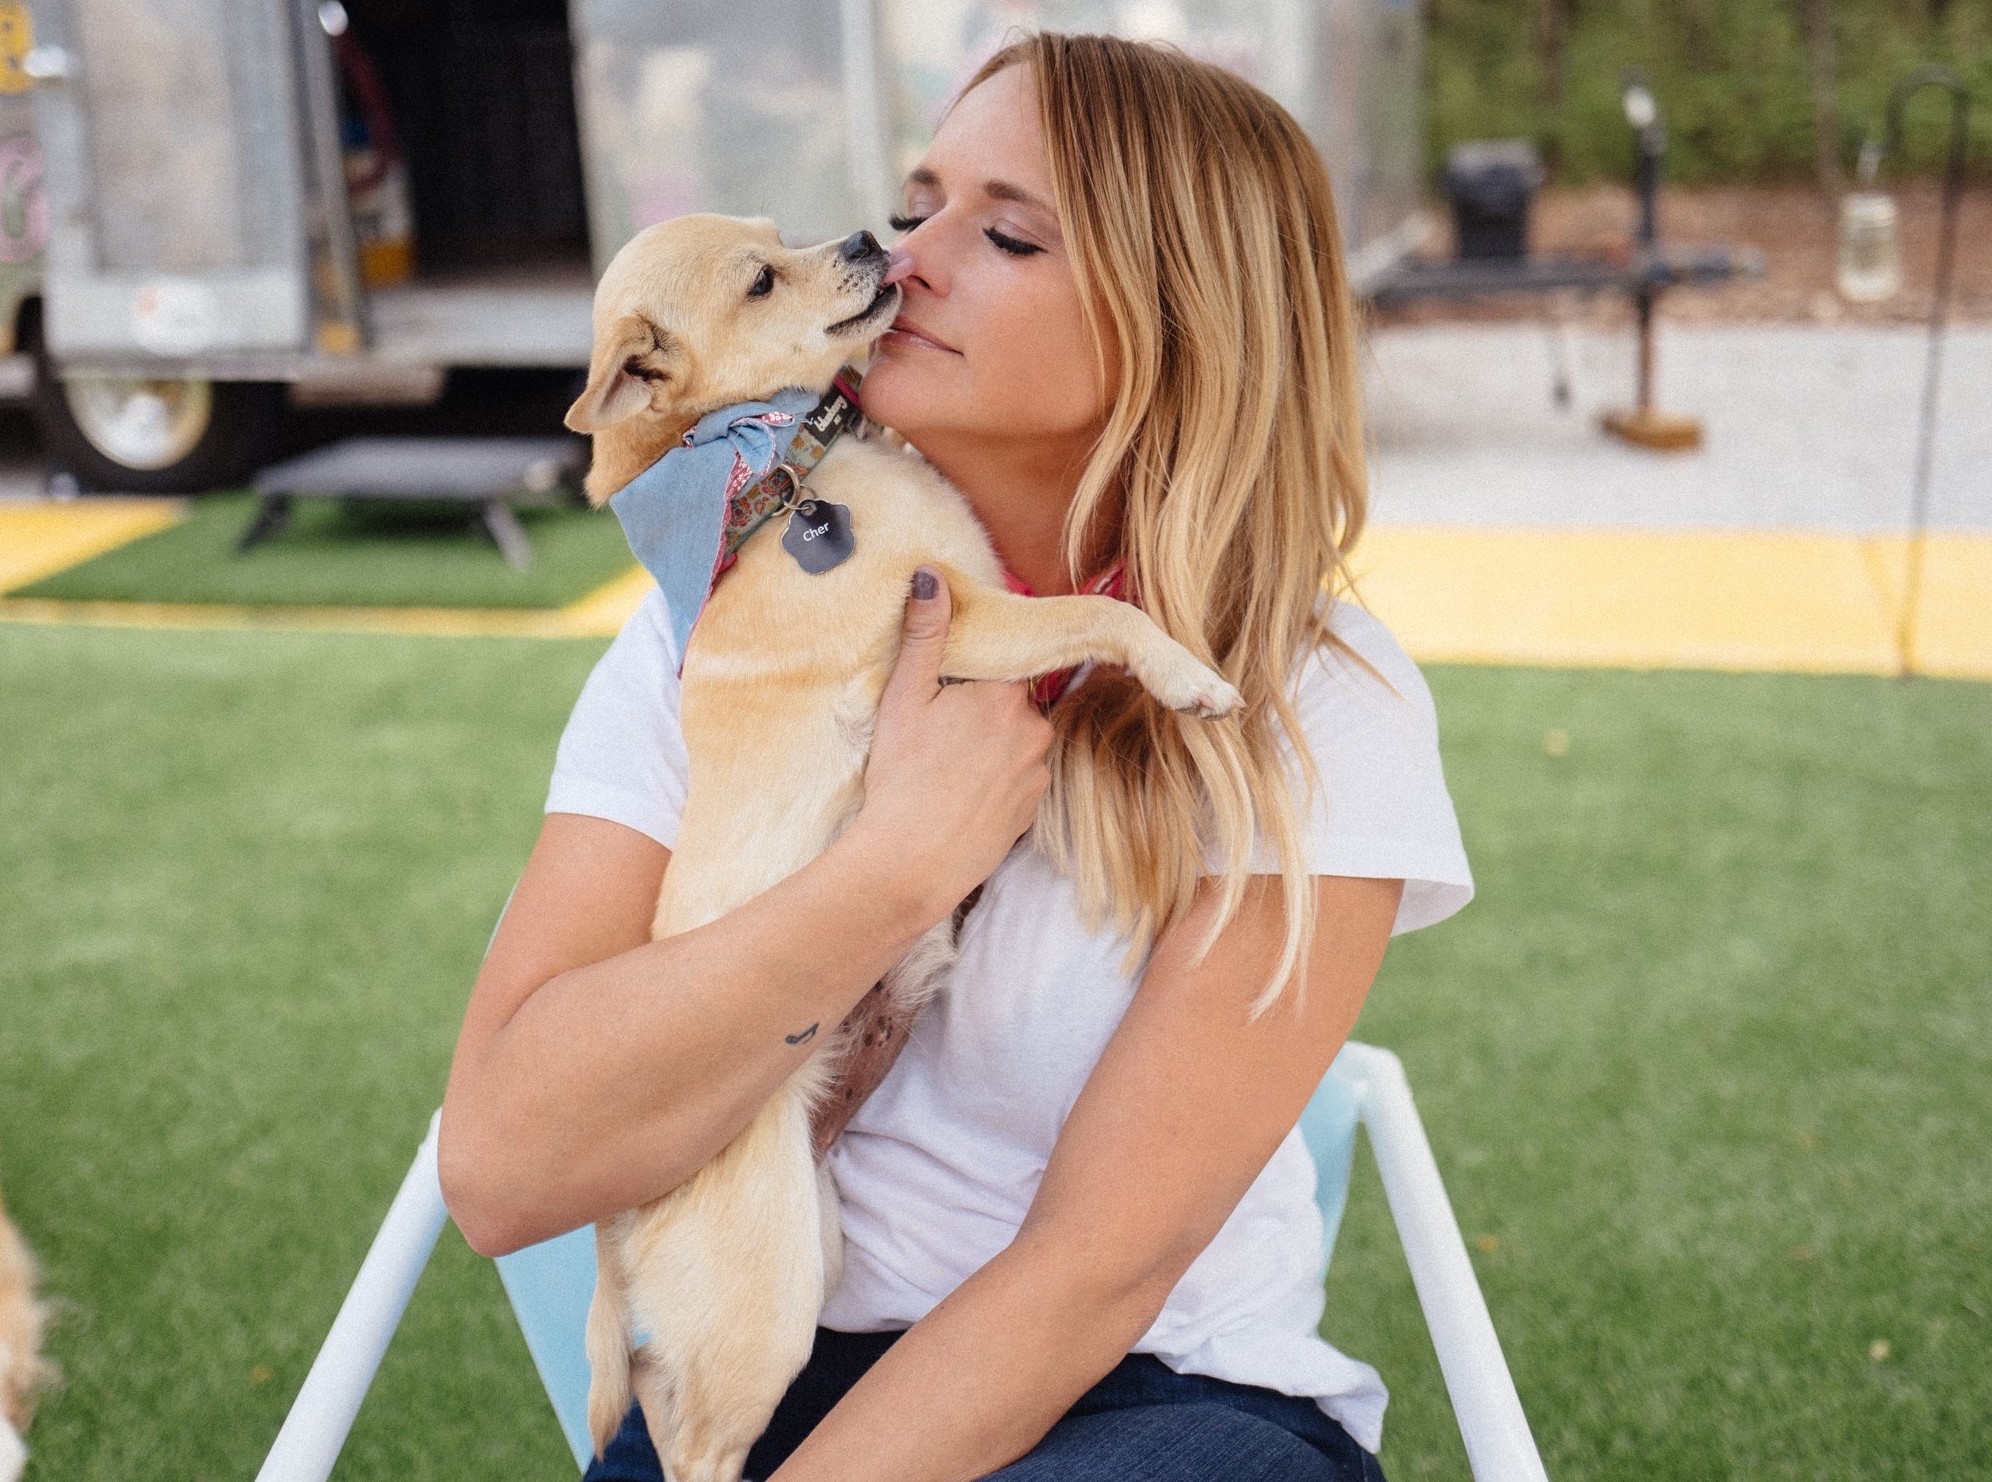 Miranda Lambert is Giving You the Chance to Adopt Puppies at CMA Fest